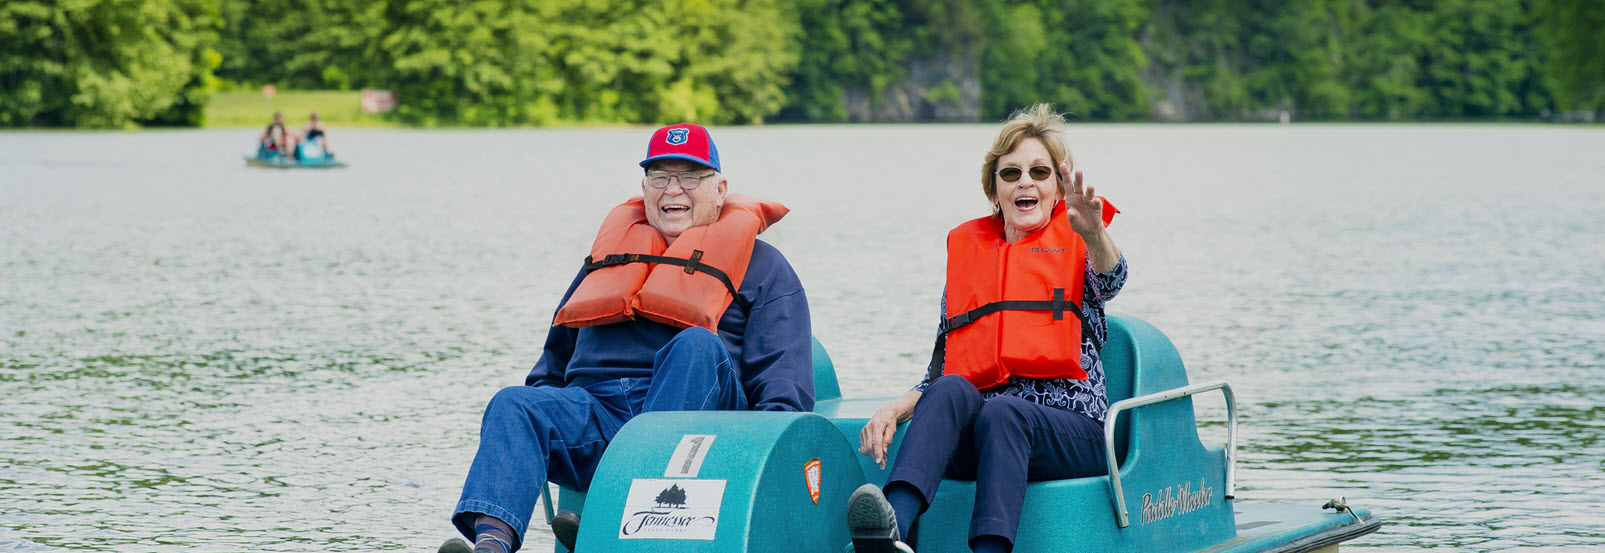 senior man and woman laugh and wave from a paddle boat in Kingsport, Tenn. state park.